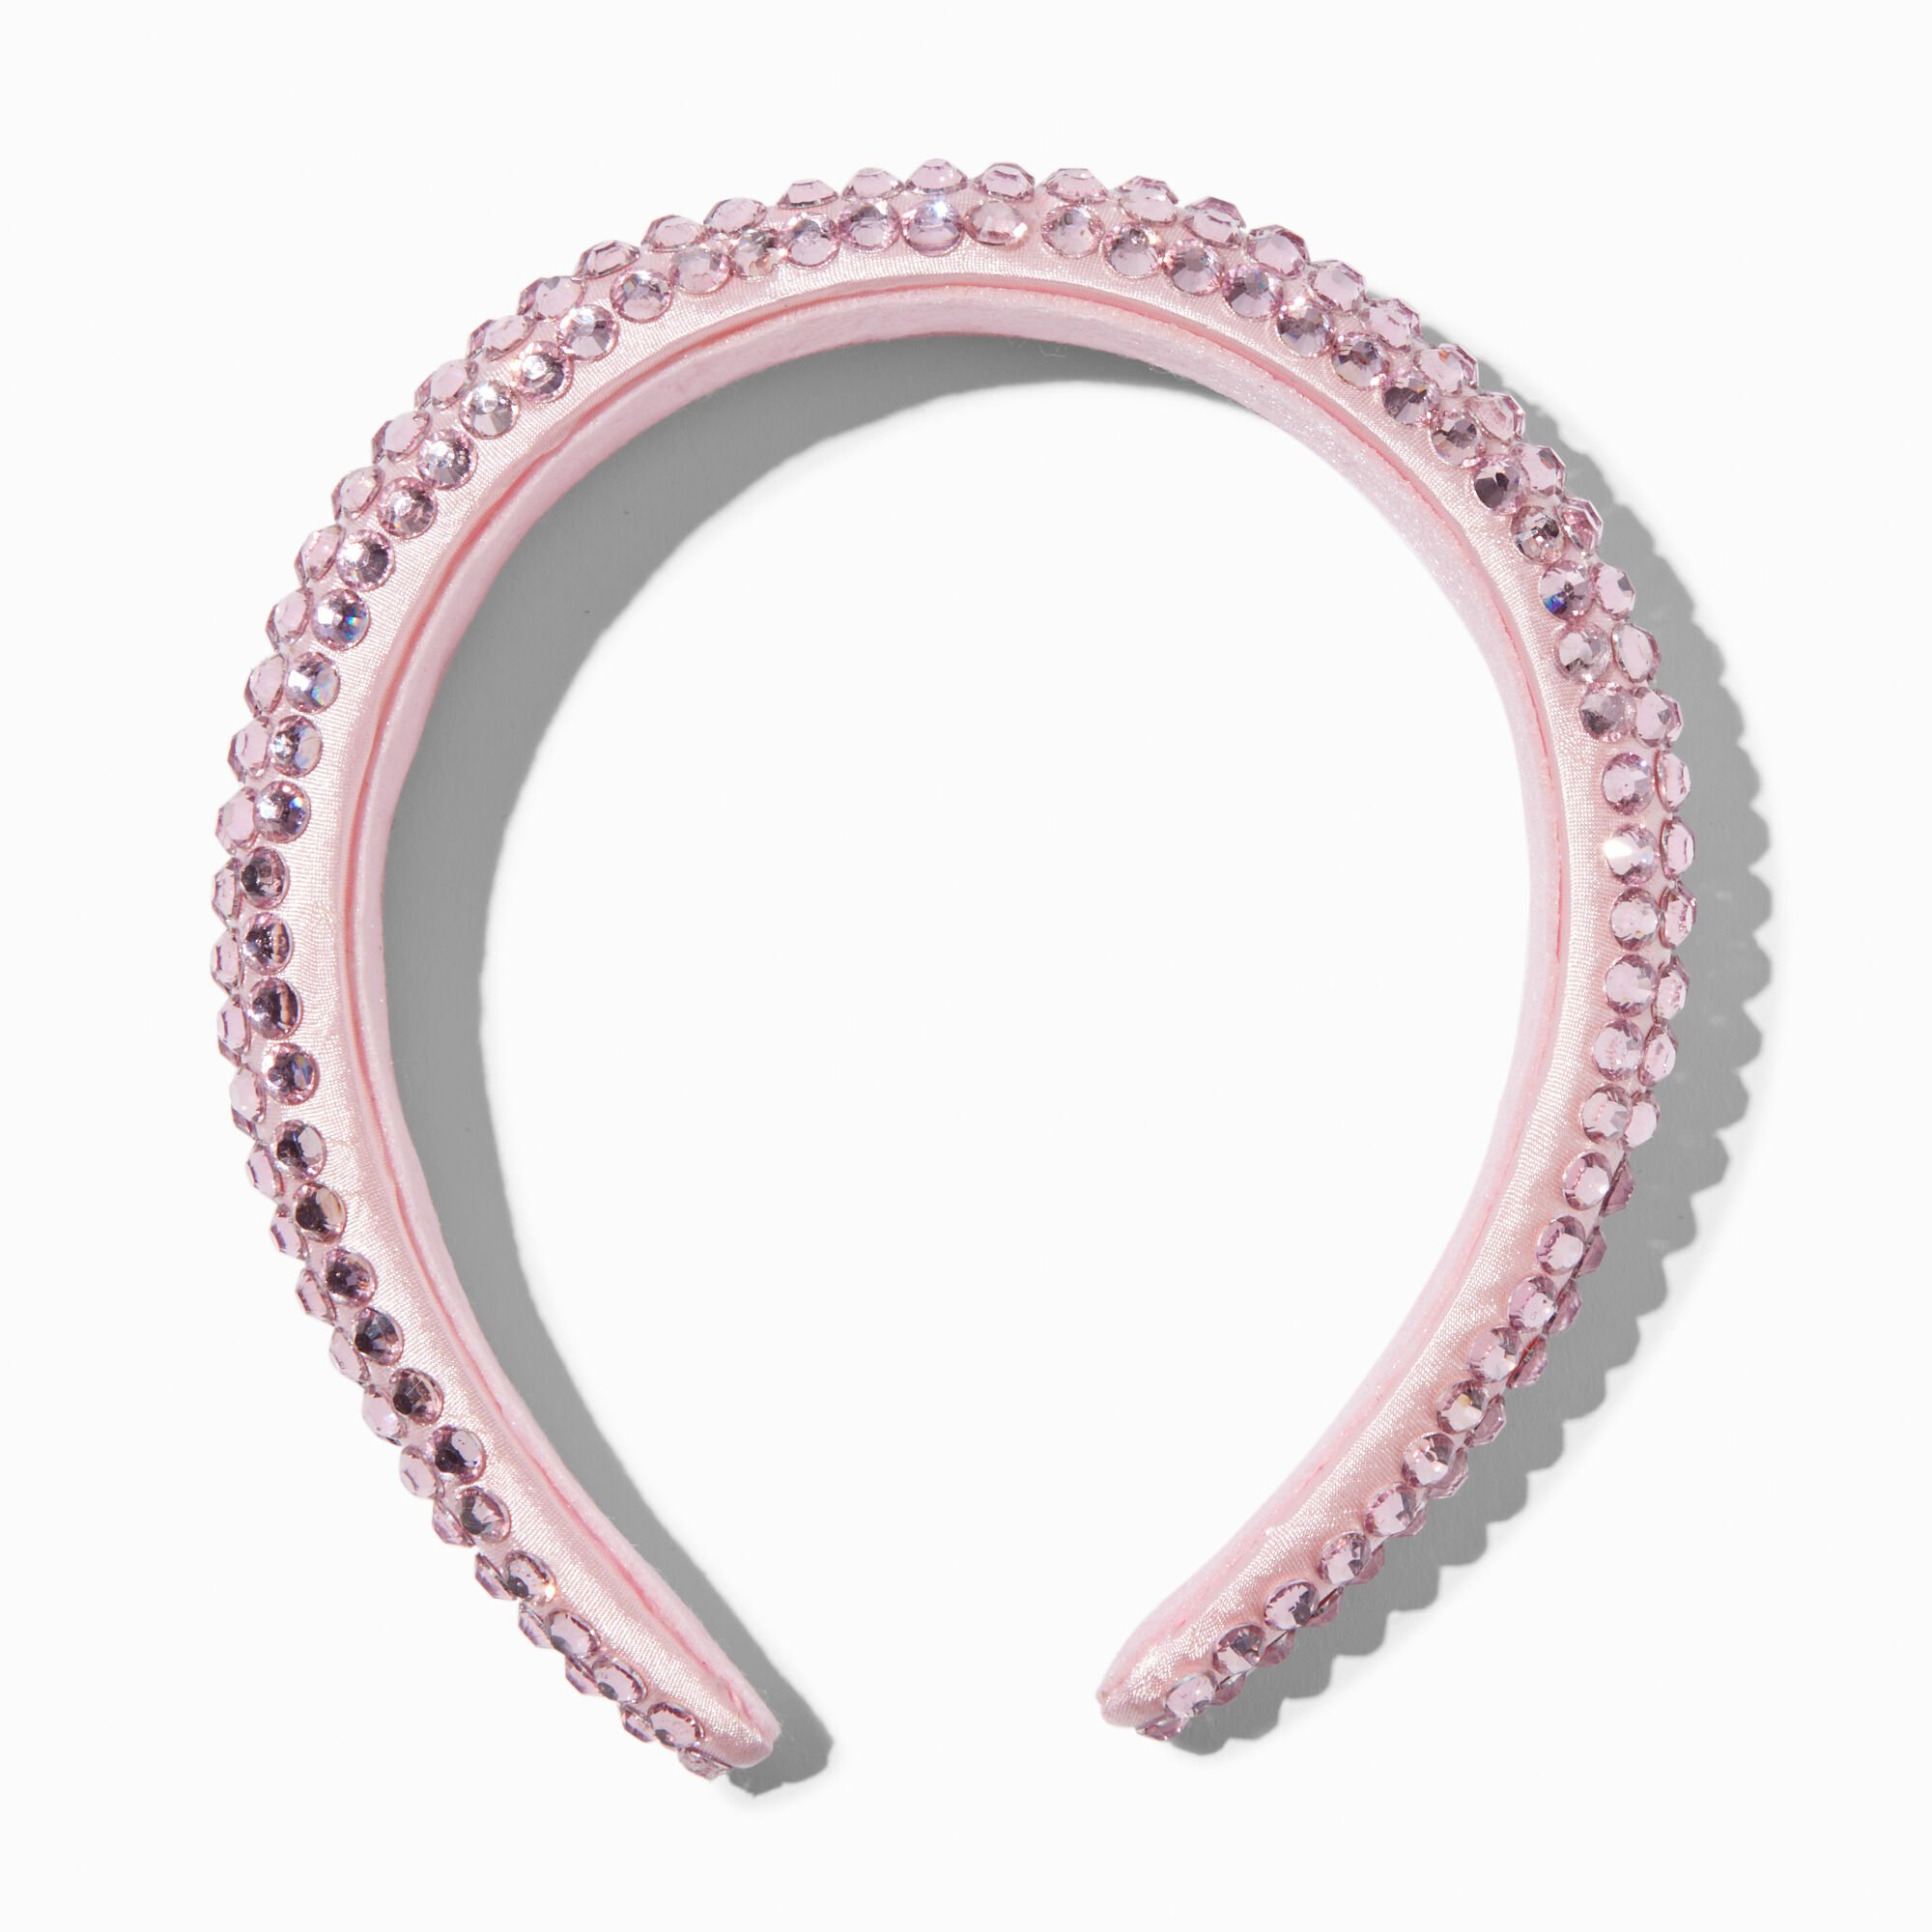 View Claires Club Crystal Headband Pink information